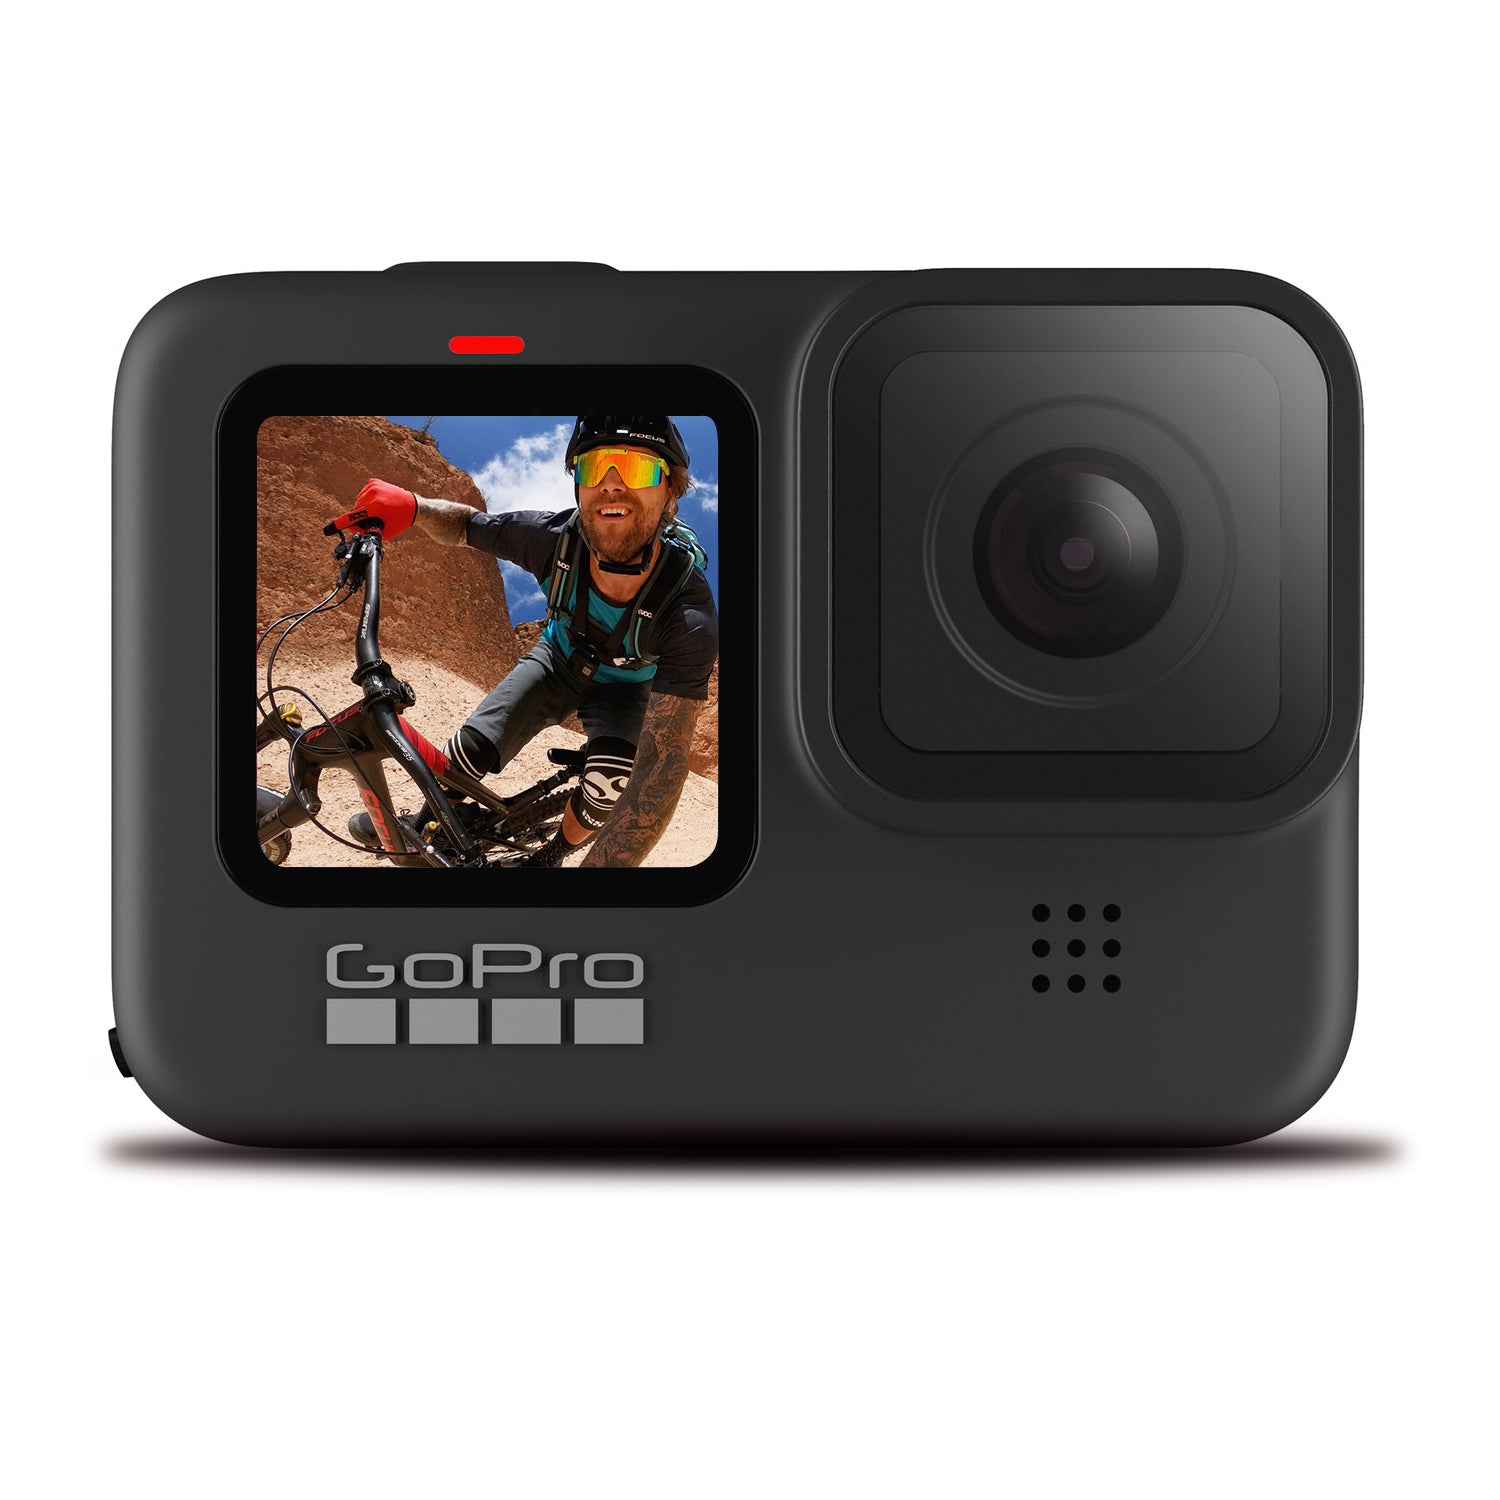 New GoPro HERO9 Black - Waterproof Action Camera with Front LCD and Touch Rear Screens, 5K Ultra HD Video, 20MP, 1080p Live Streaming, Webcam